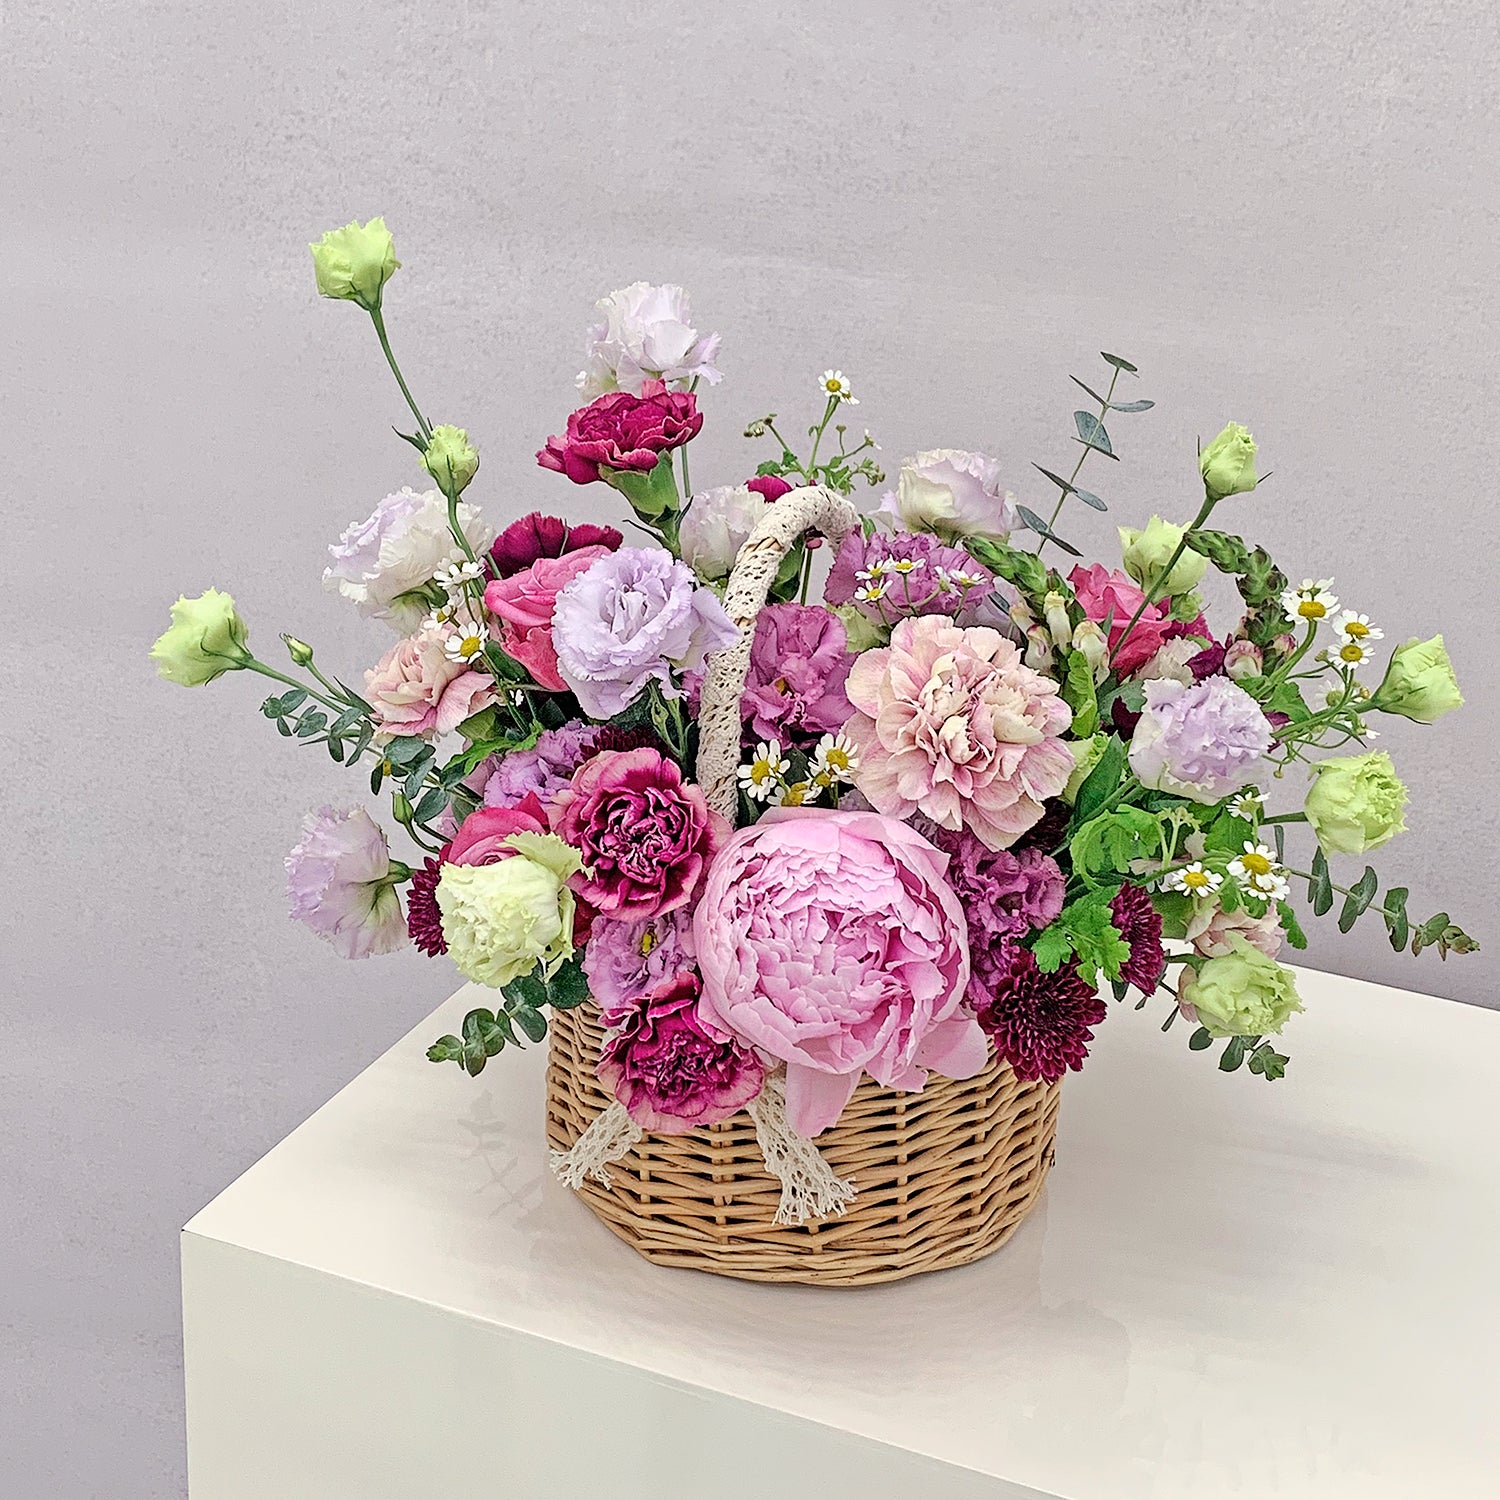 The Ultimate Guide: Flowers For Every Season